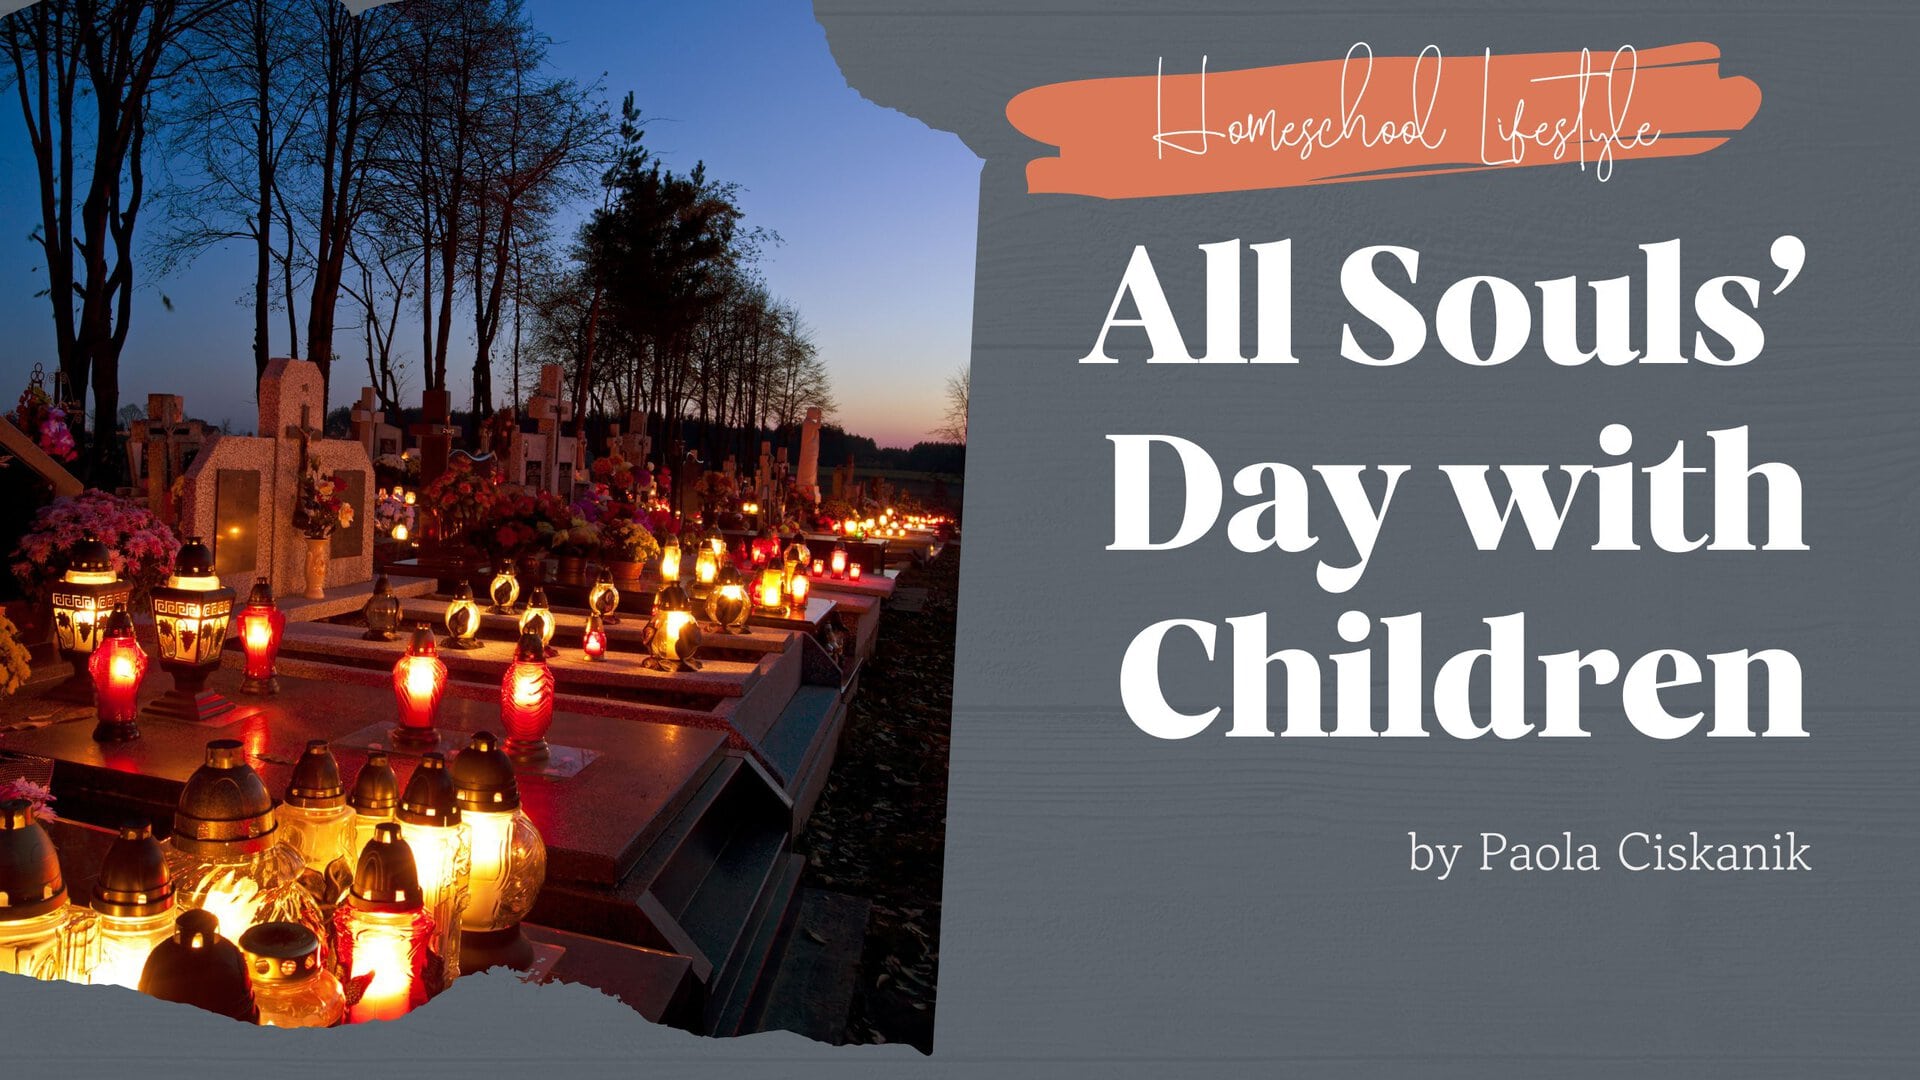 All Souls’ Day with Children